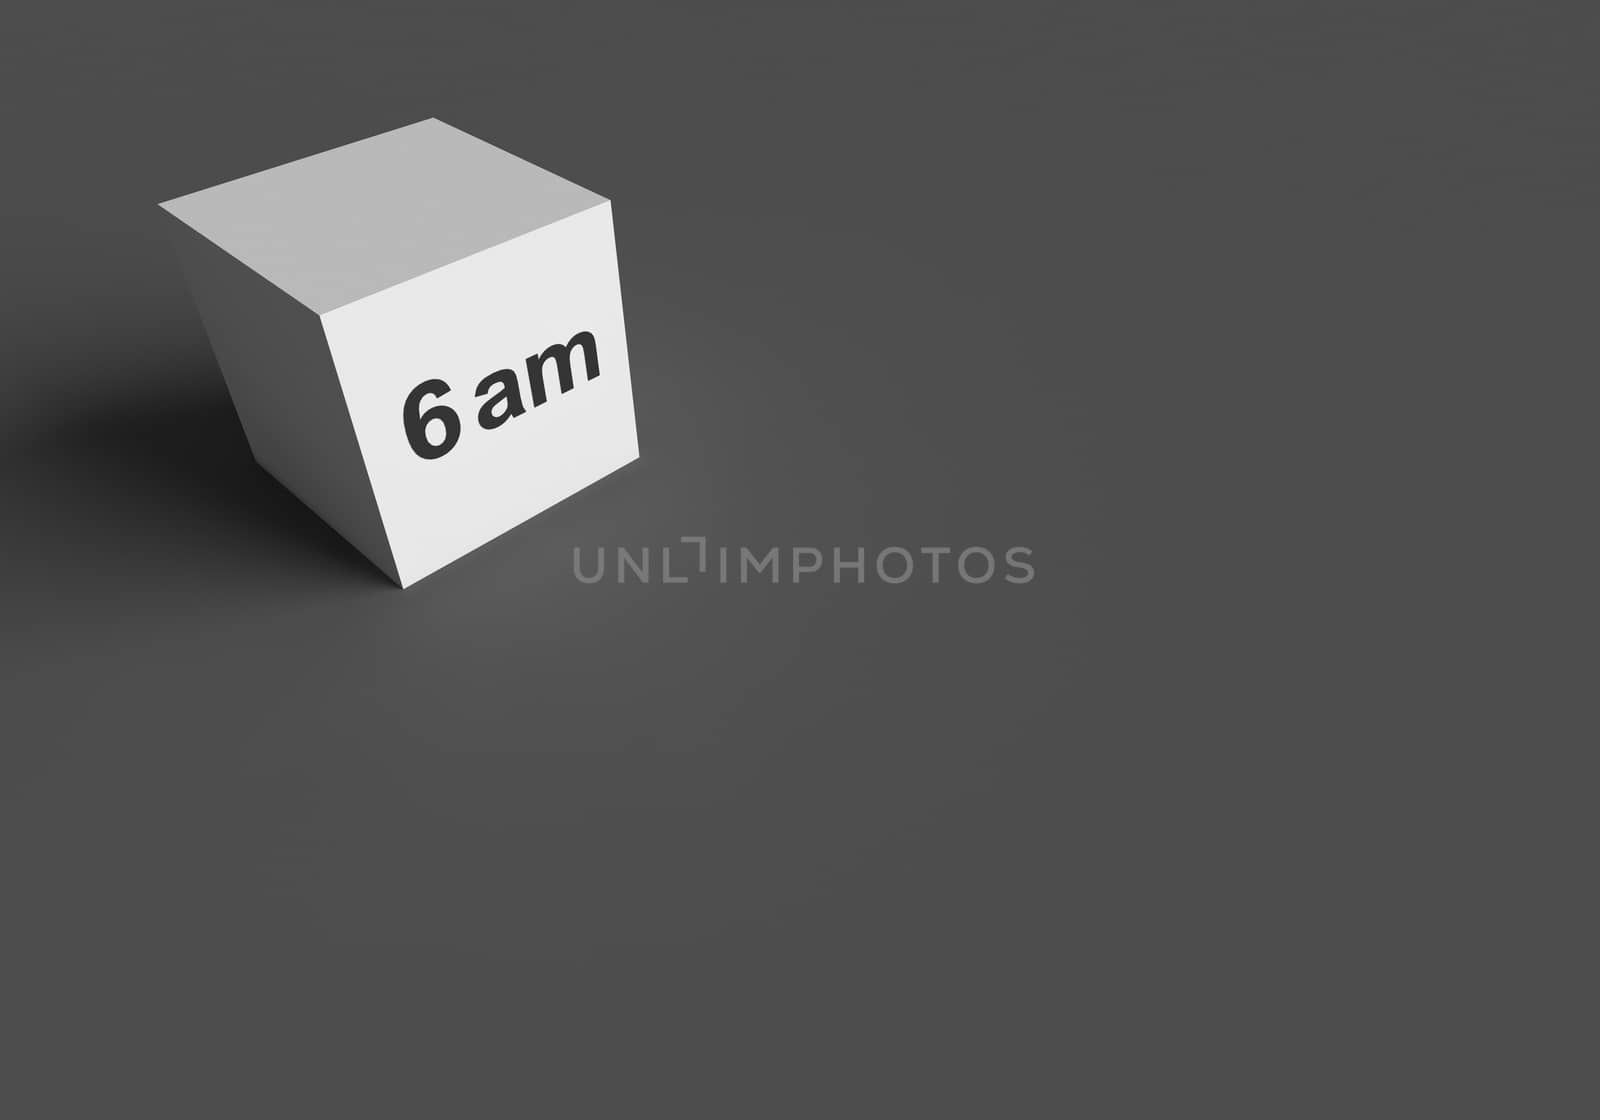 3D RENDERING WORDS 6 am ON WHITE CUBE, STOCK PHOTO